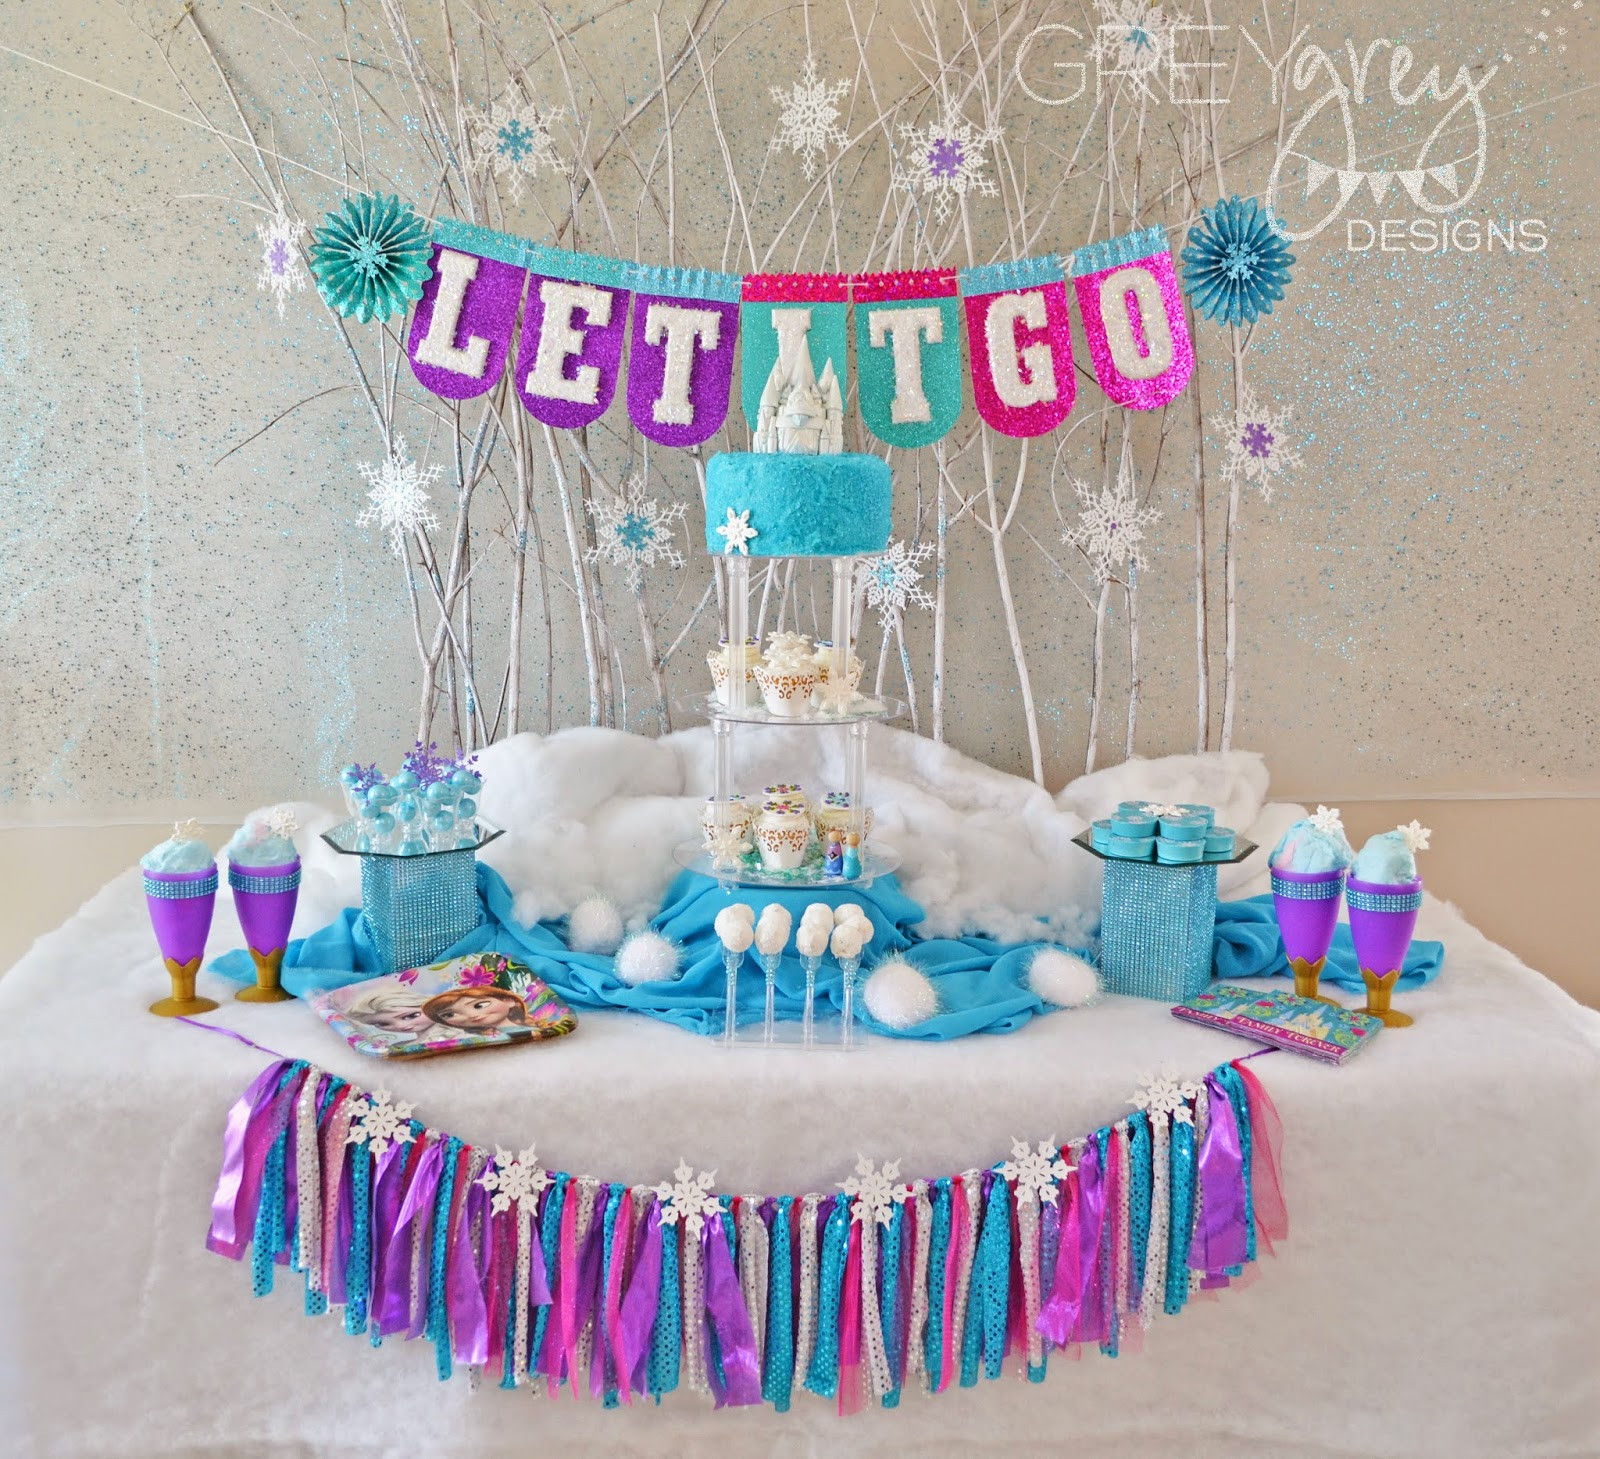 Frozen Birthday Decorations
 GreyGrey Designs Giveaway Frozen Birthday Party Pack for